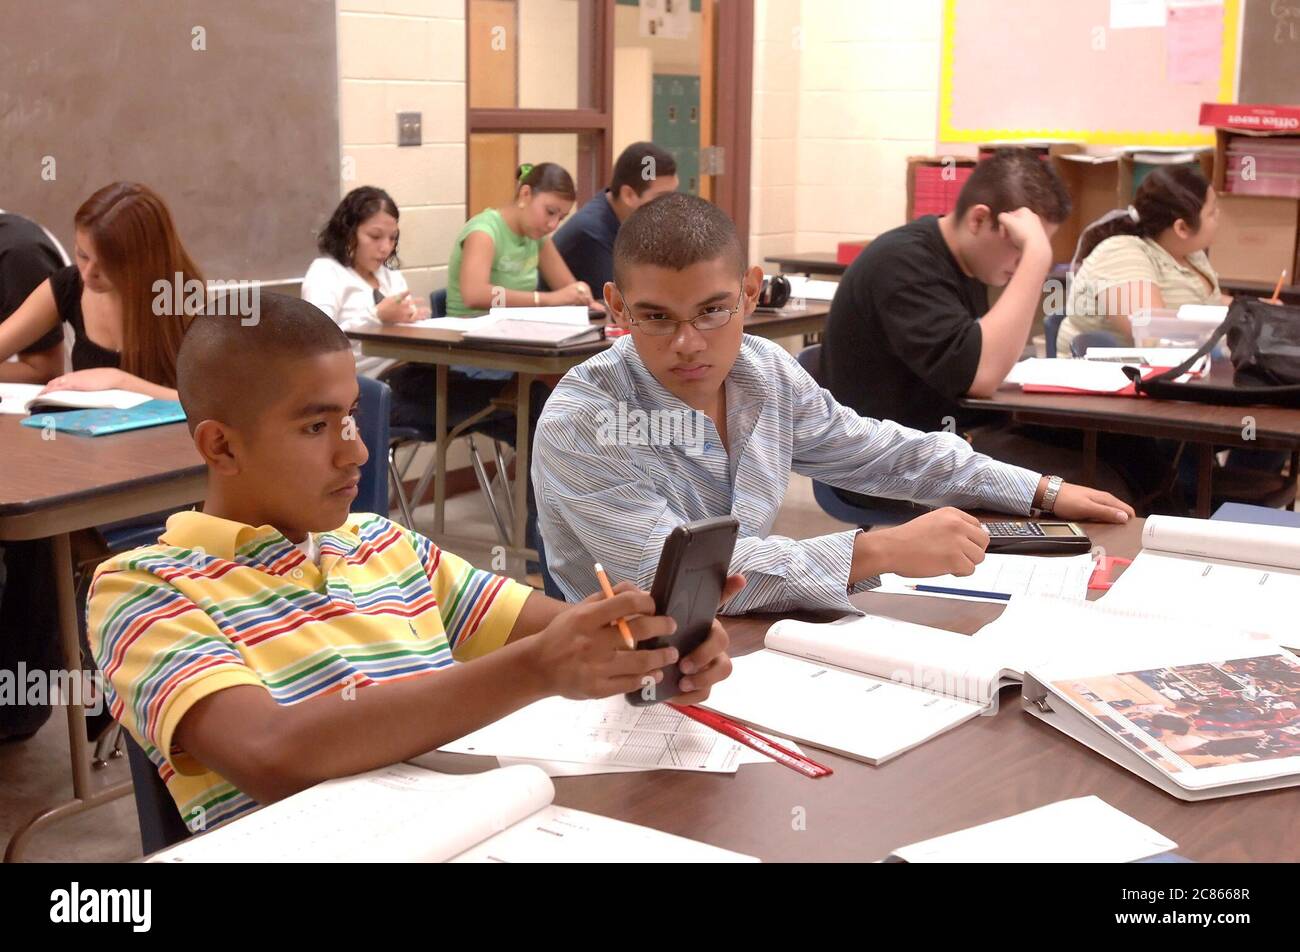 Brownsville, Texas USA, December 2 2005: Students at Lopez High School work on math problems in Algebra II classroom using hand-held scientific calculators. The student population of Lopez HS is over 99% Hispanic.  ©Bob Daemmrich Stock Photo